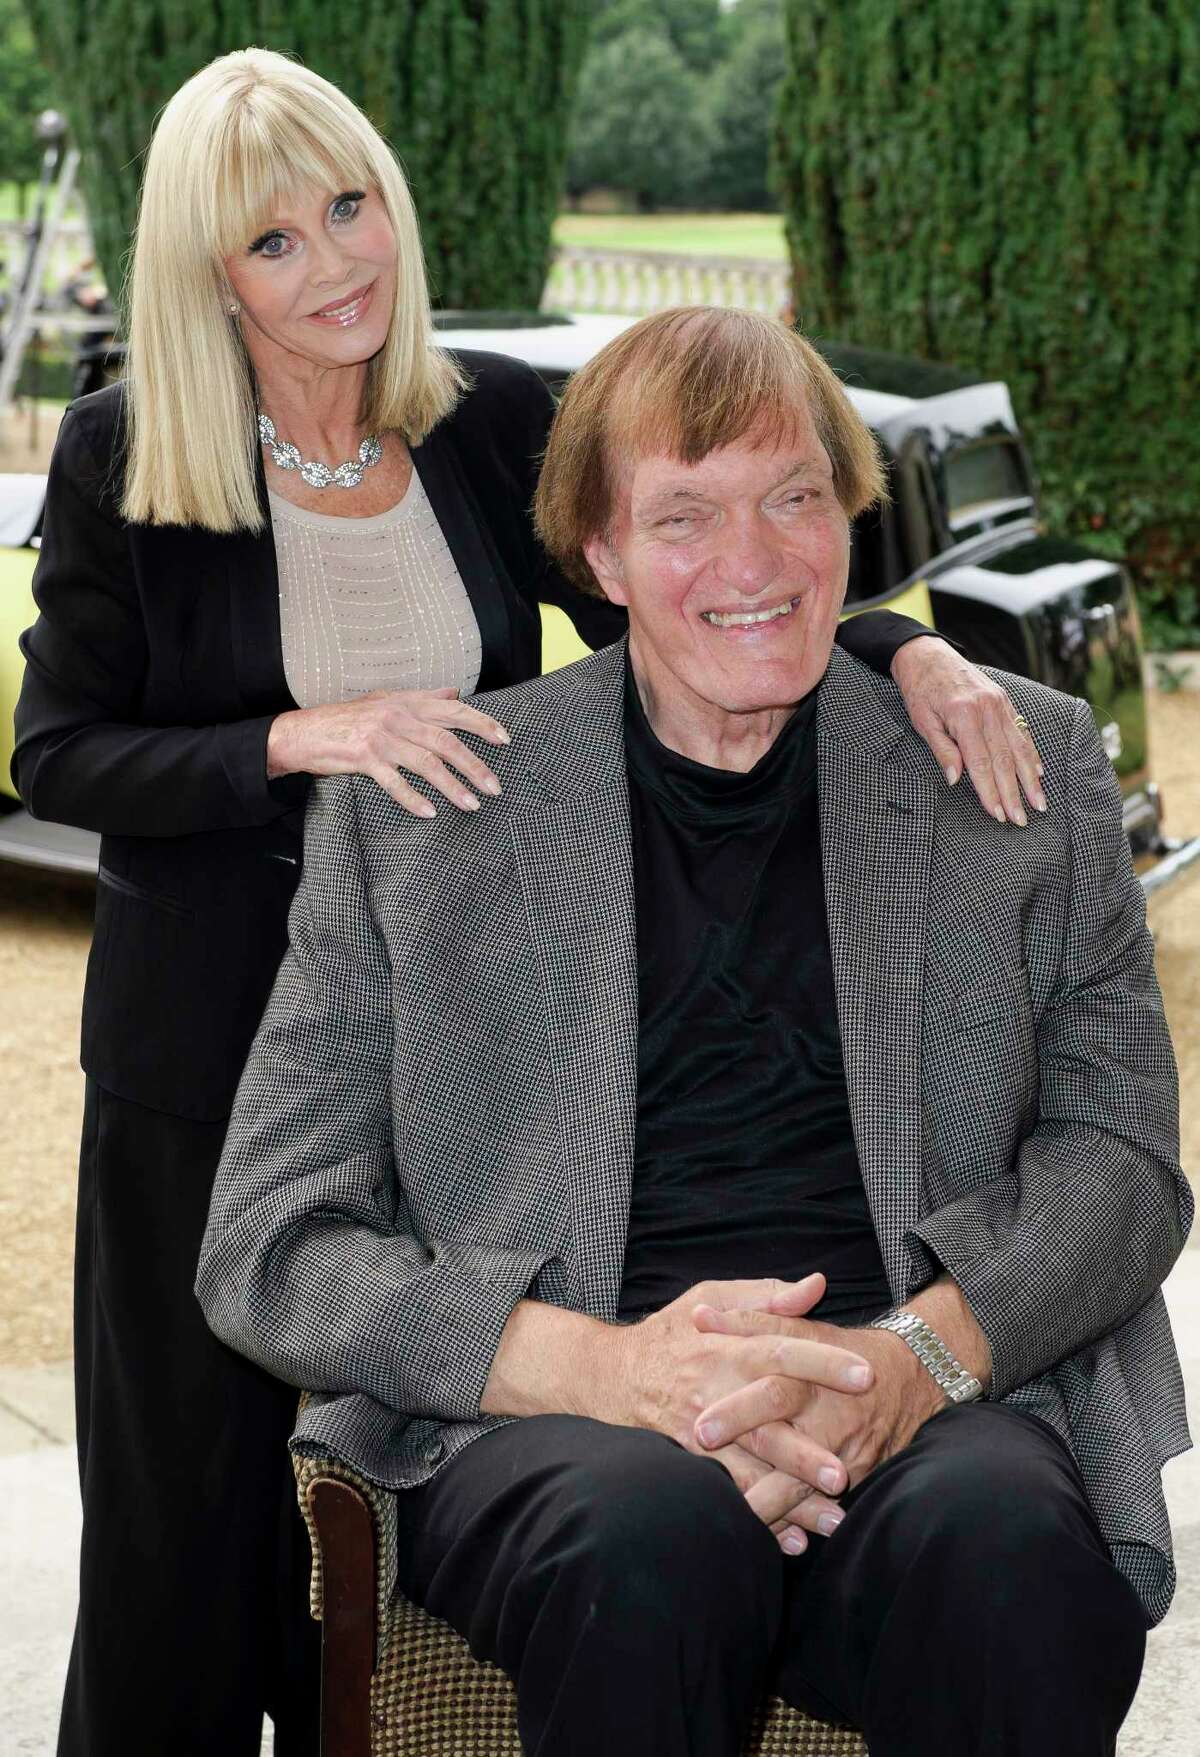 FILE - In this Sept. 21, 2012 file photo, from left, Britt Ekland and Richard Kiel attend a photocall for the “Bond 50” anniversary in London. Kiel, the towering actor best known for portraying steel-toothed villain Jaws in a pair of James Bond films, has died. He was 74.